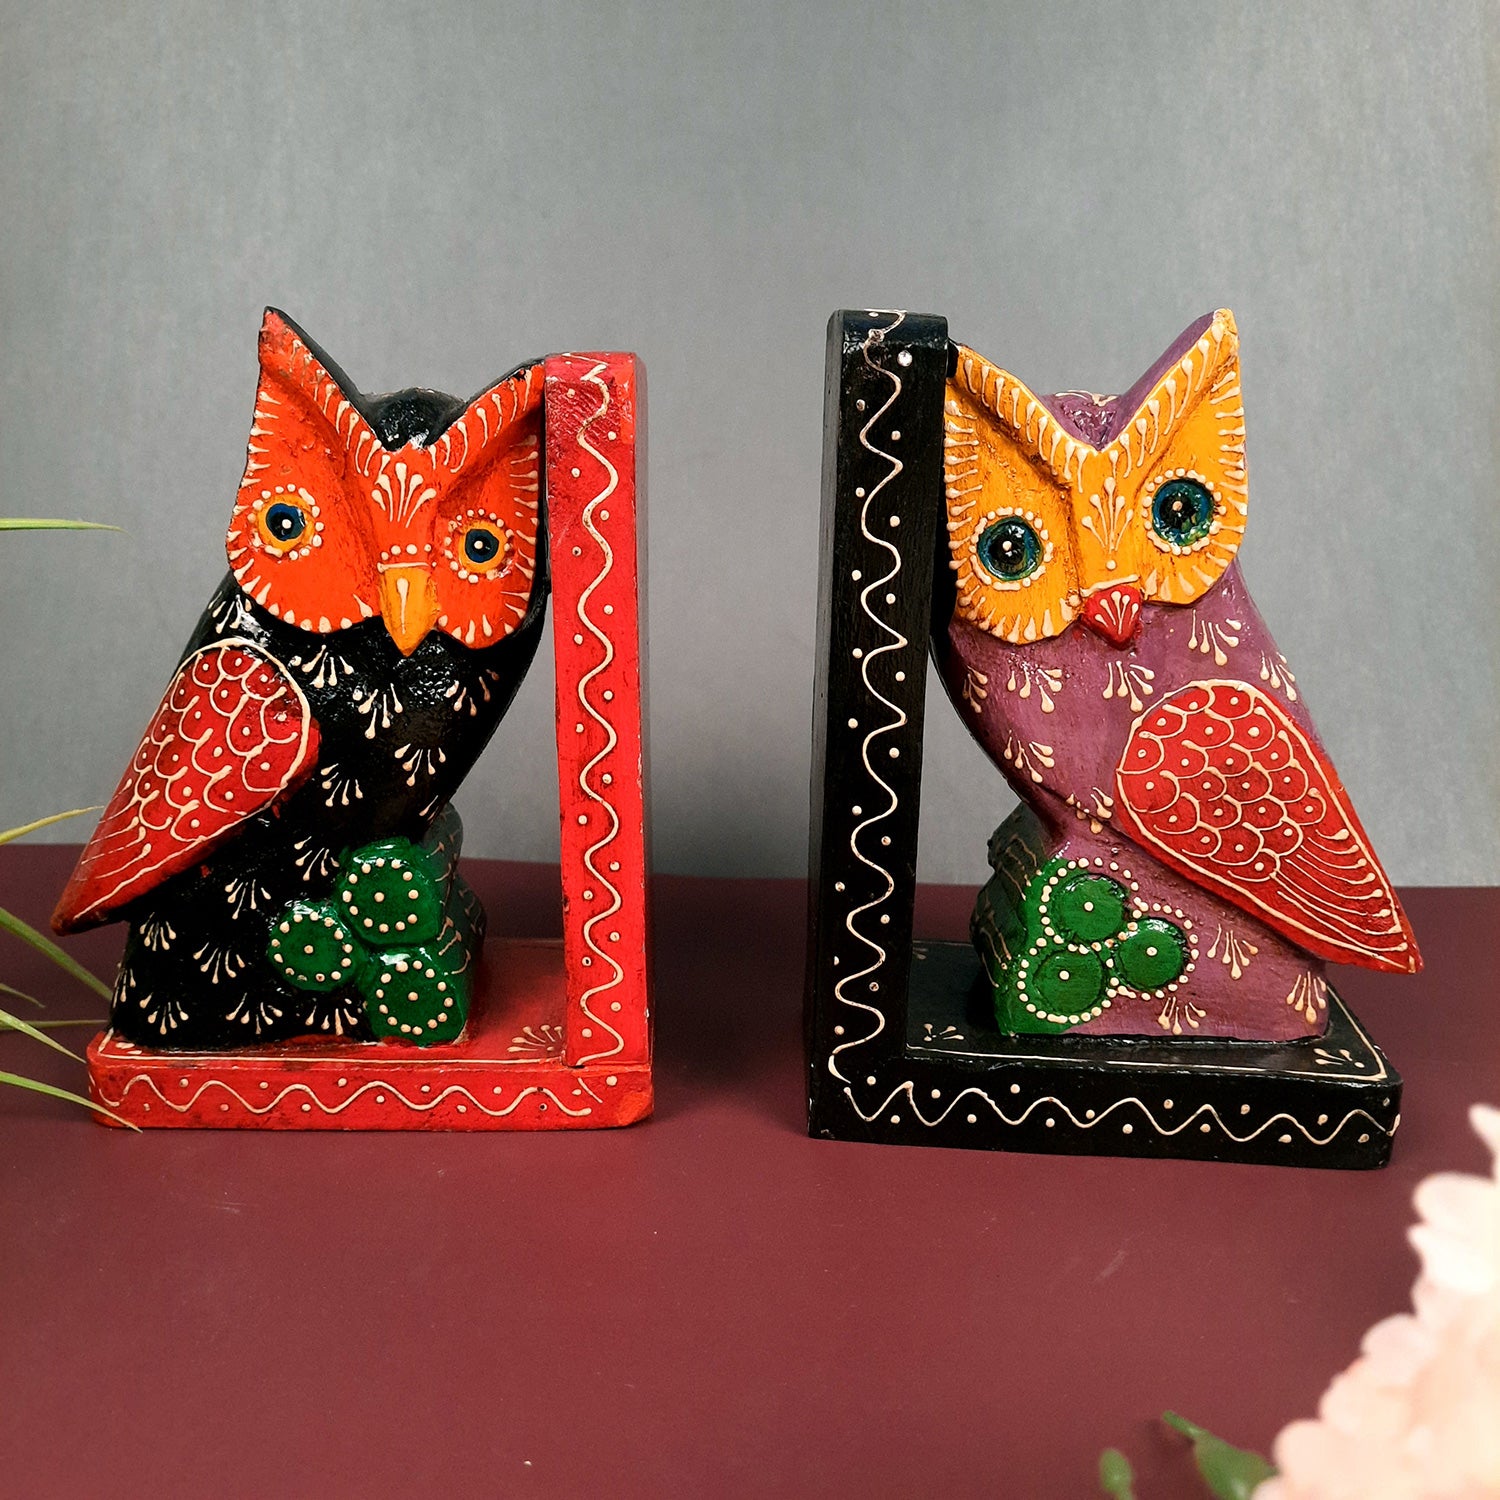 Wooden Book Ends - Owl Design | Quirky Book Organizer | Book Racks Shelf - For Home, Table, Shelves, Kids Room, Study, Office Decor & Gifts -8 Inch - Apkamart